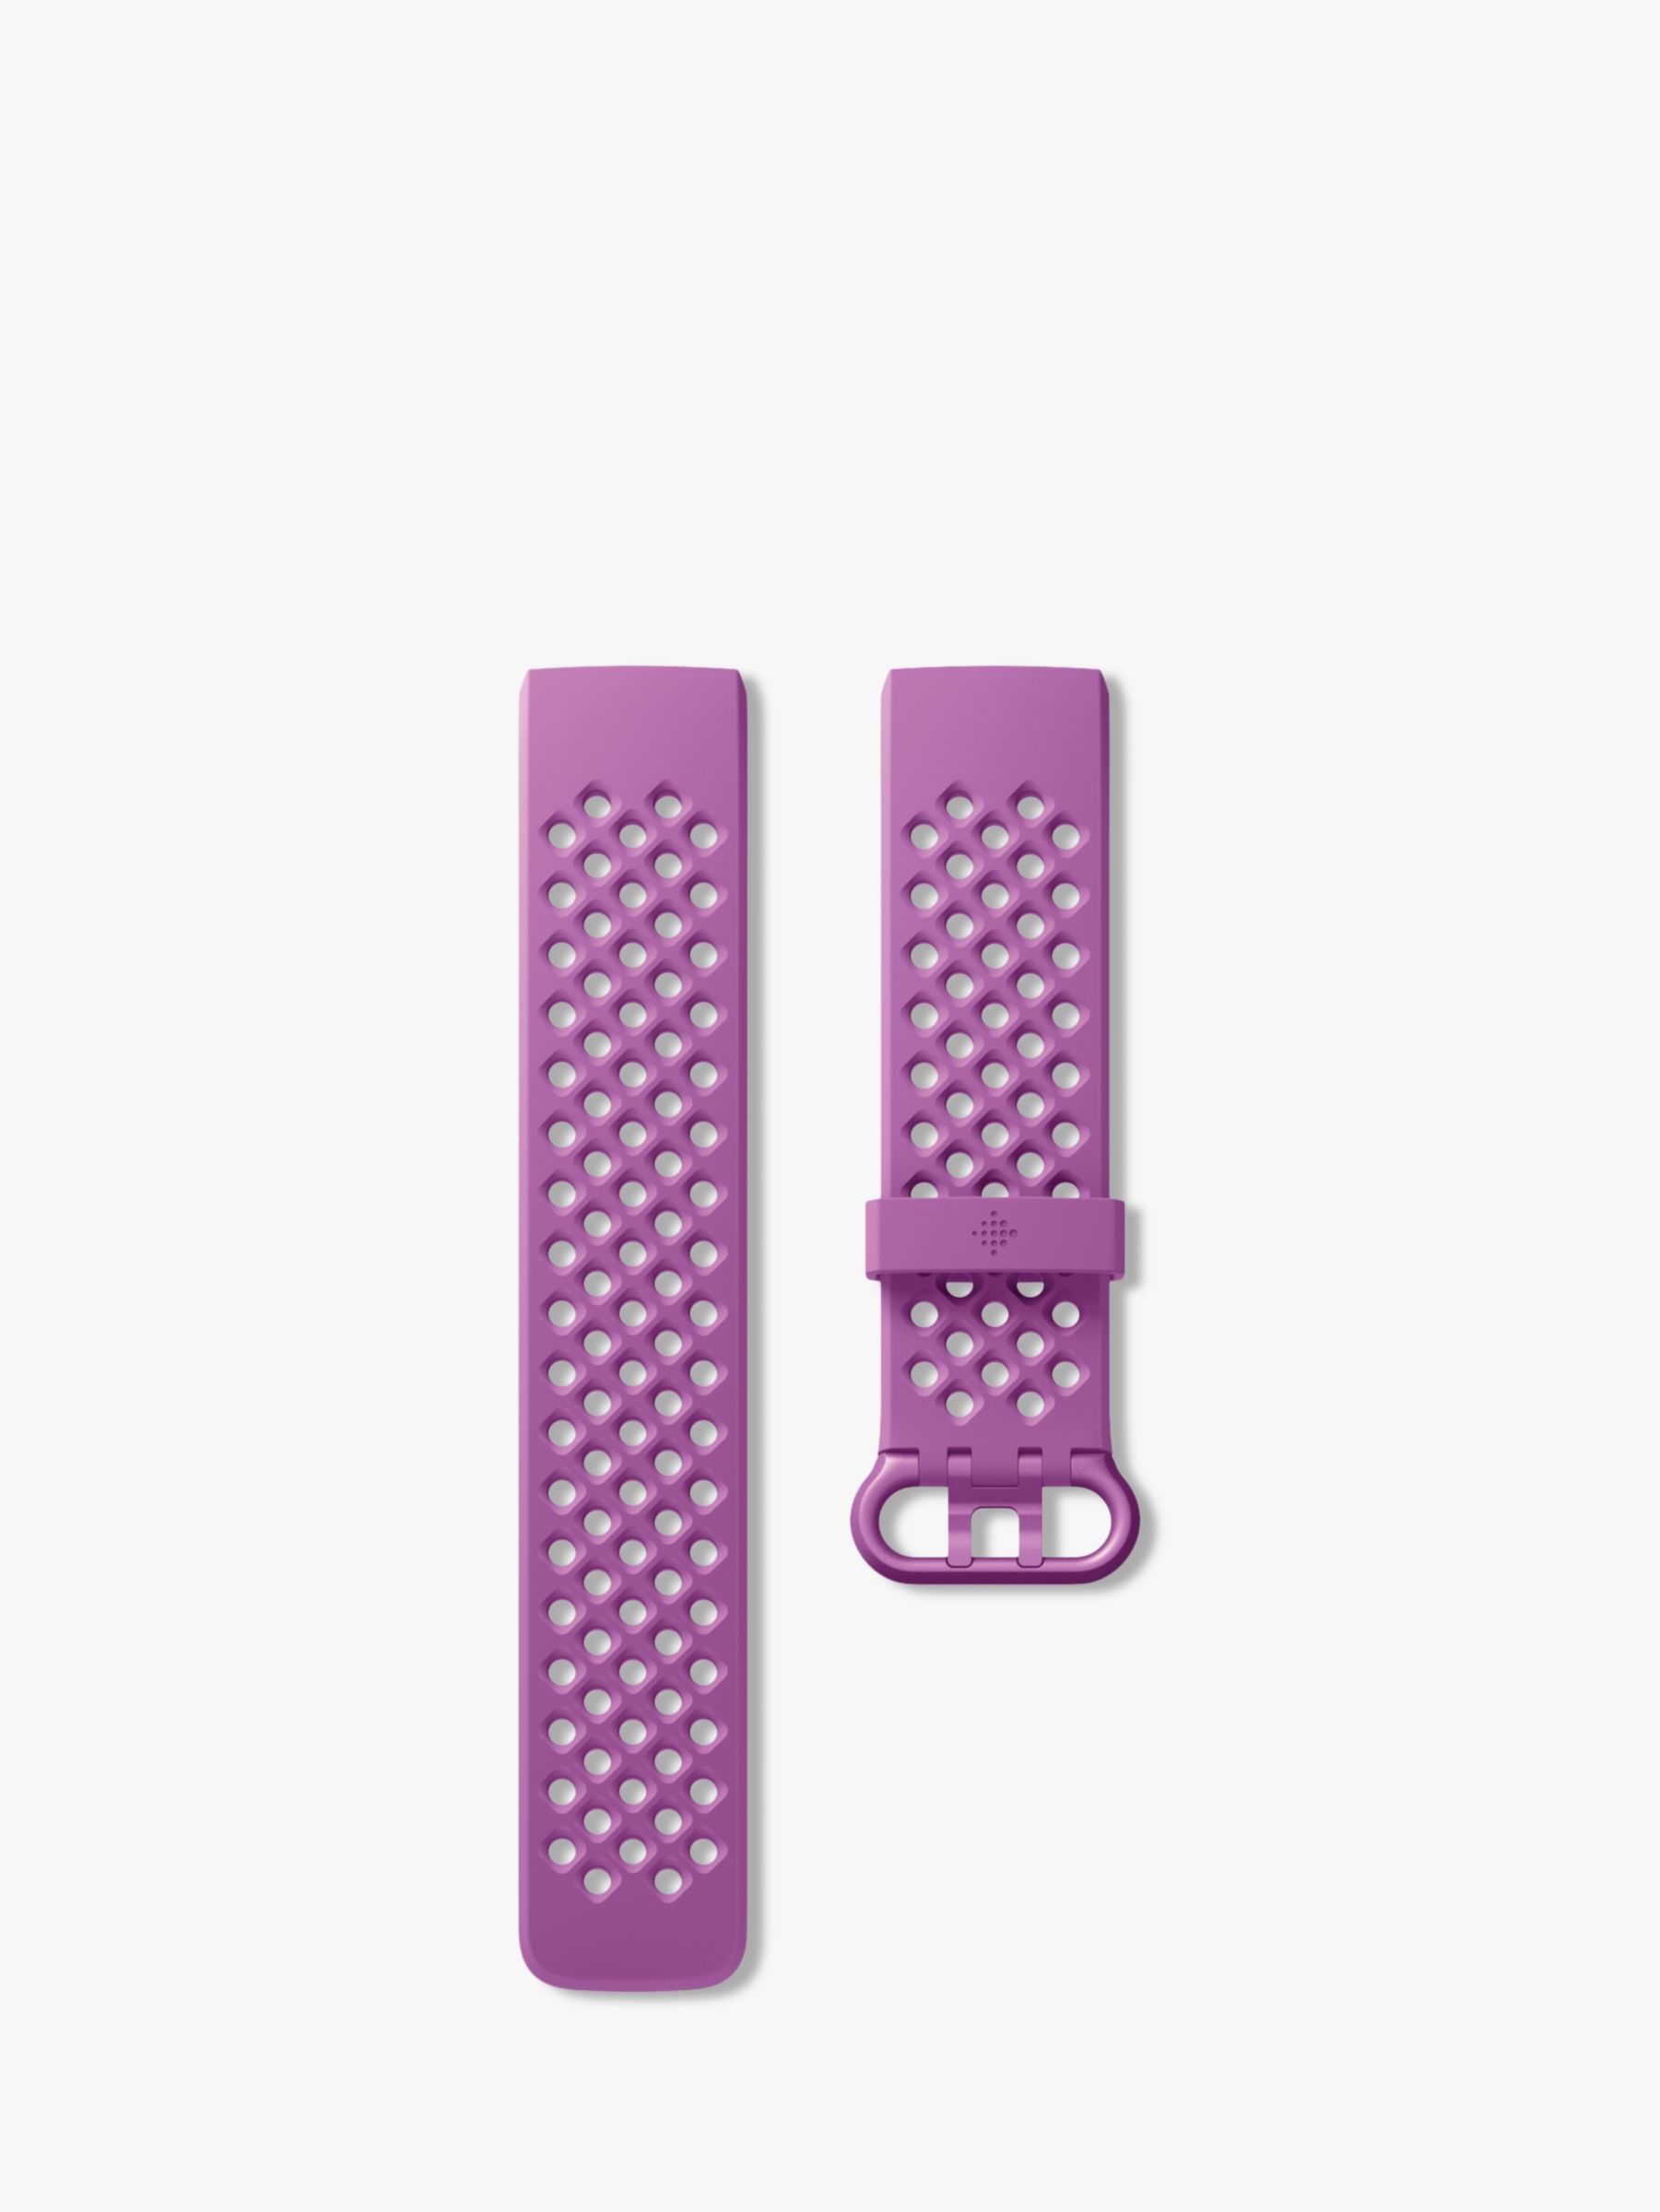 fitbit john lewis charge 3